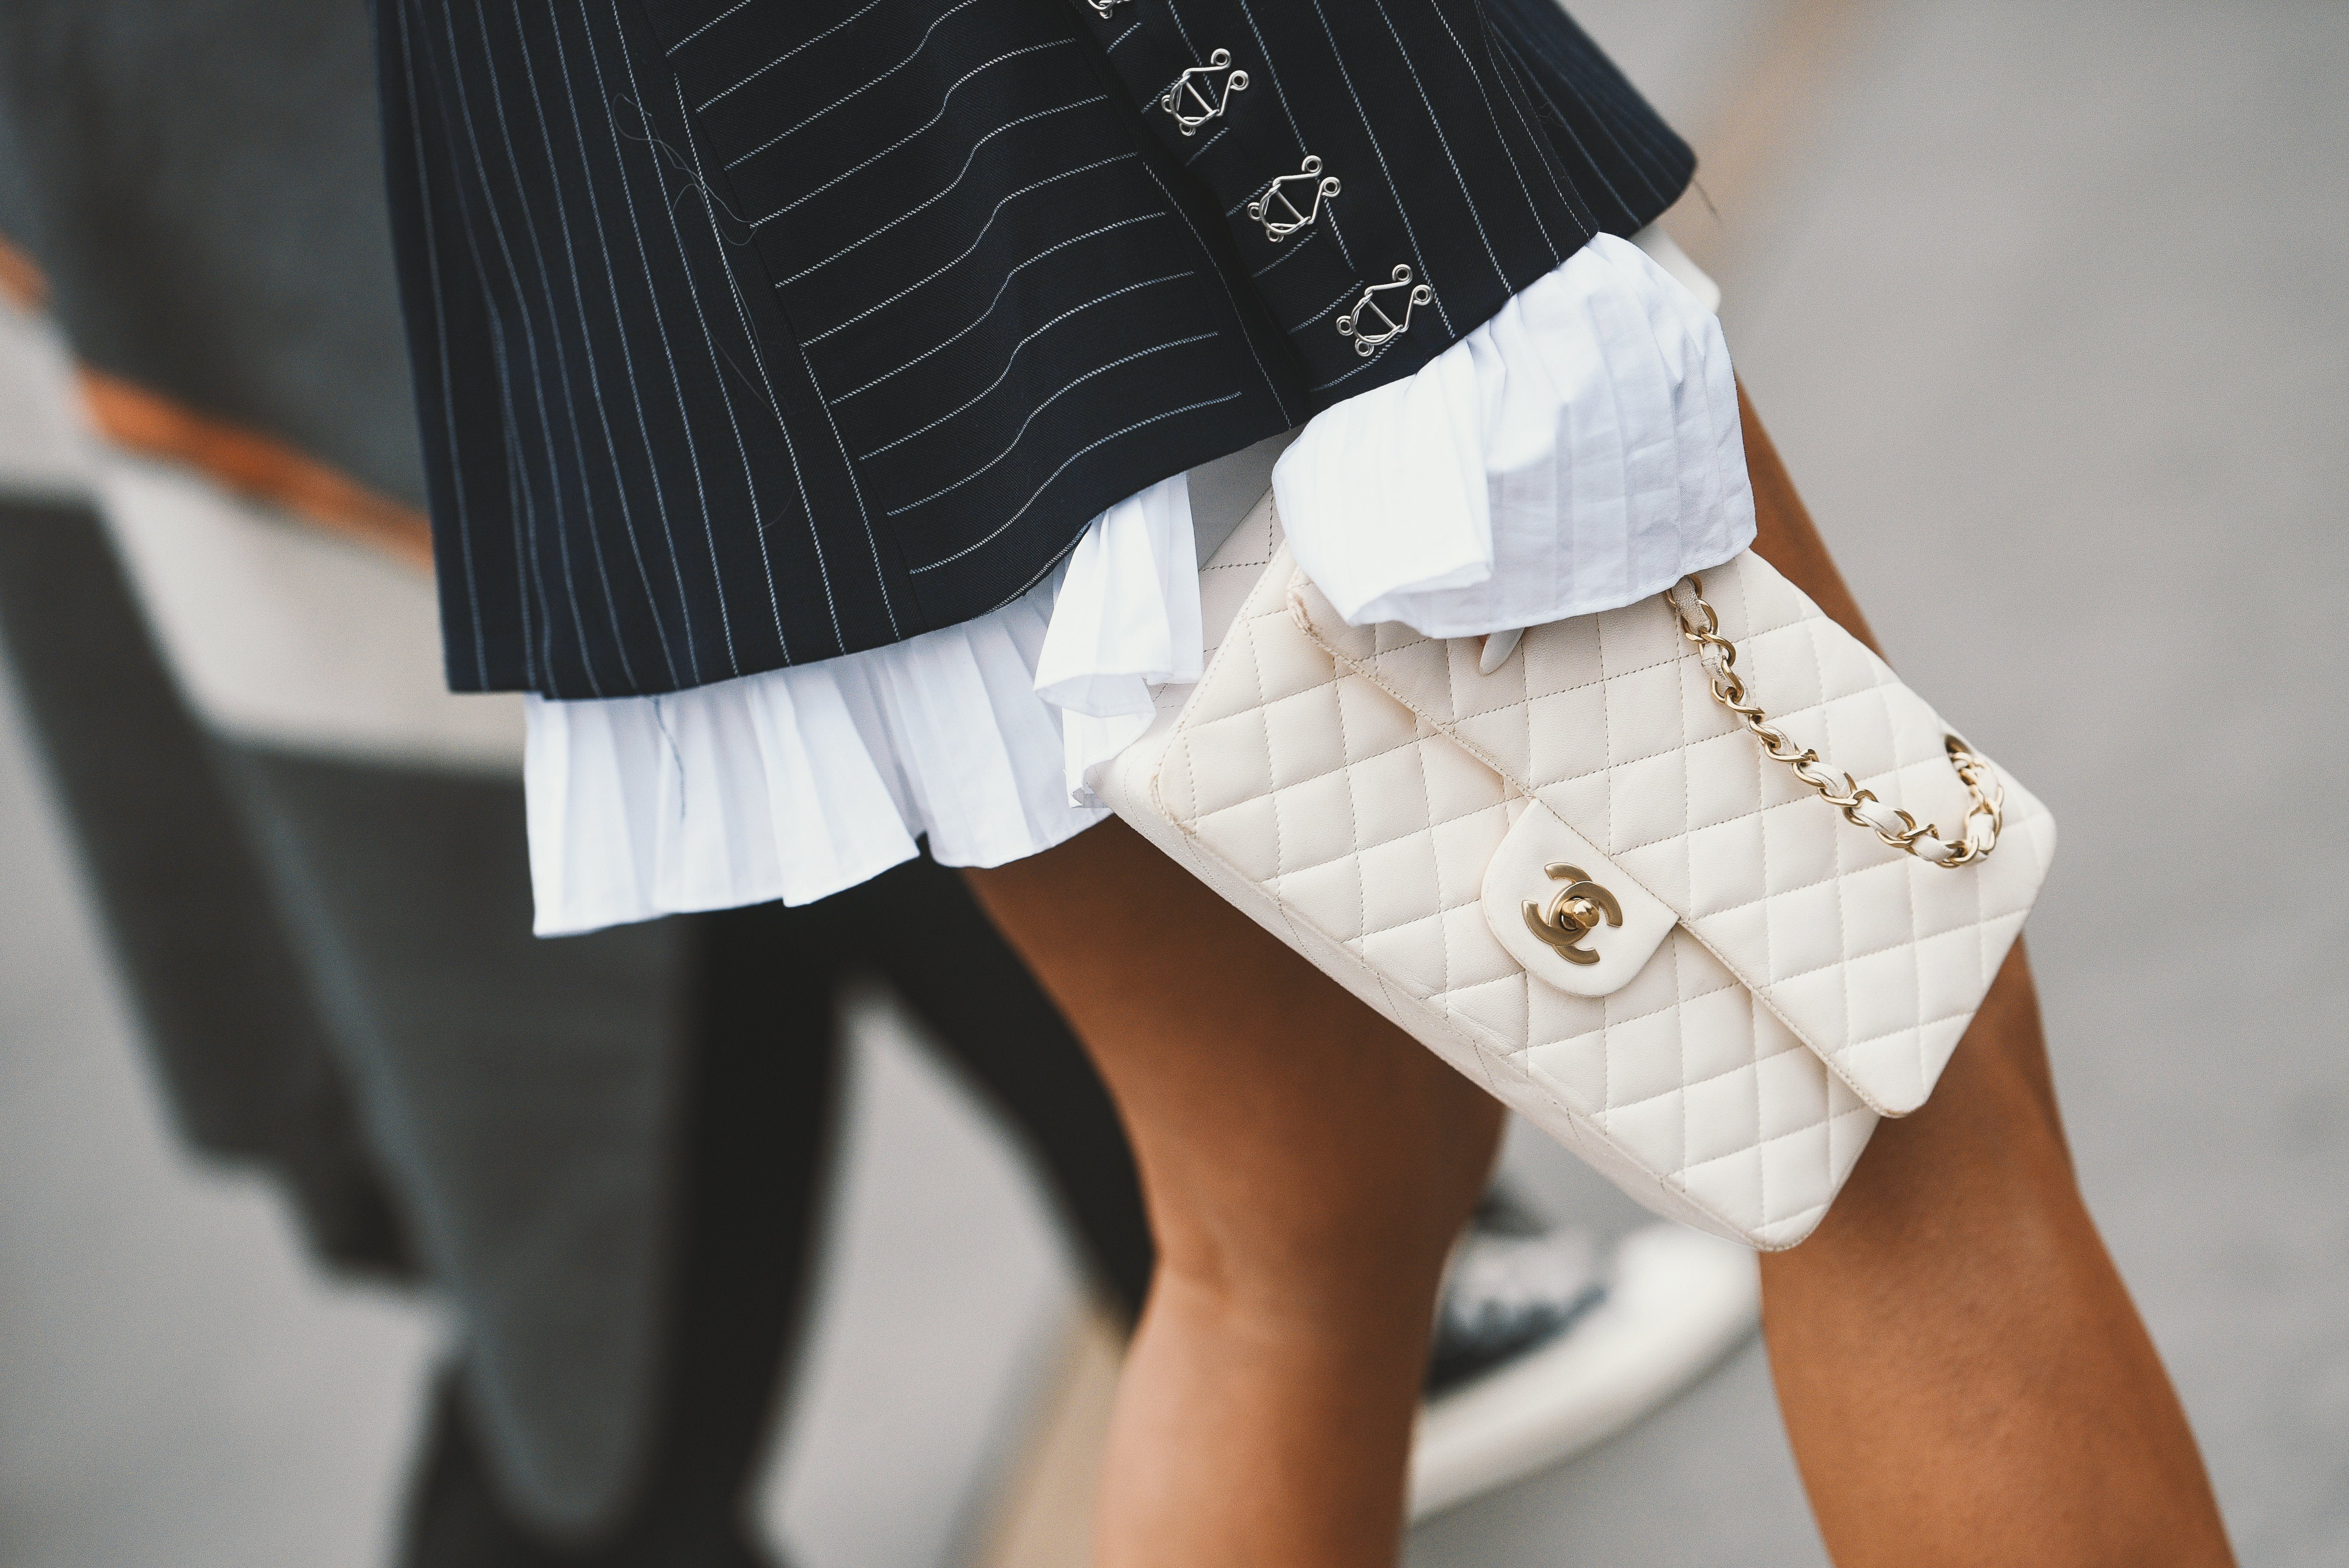 Is Chanel Better Than Louis Vuitton - AuthenticExperts